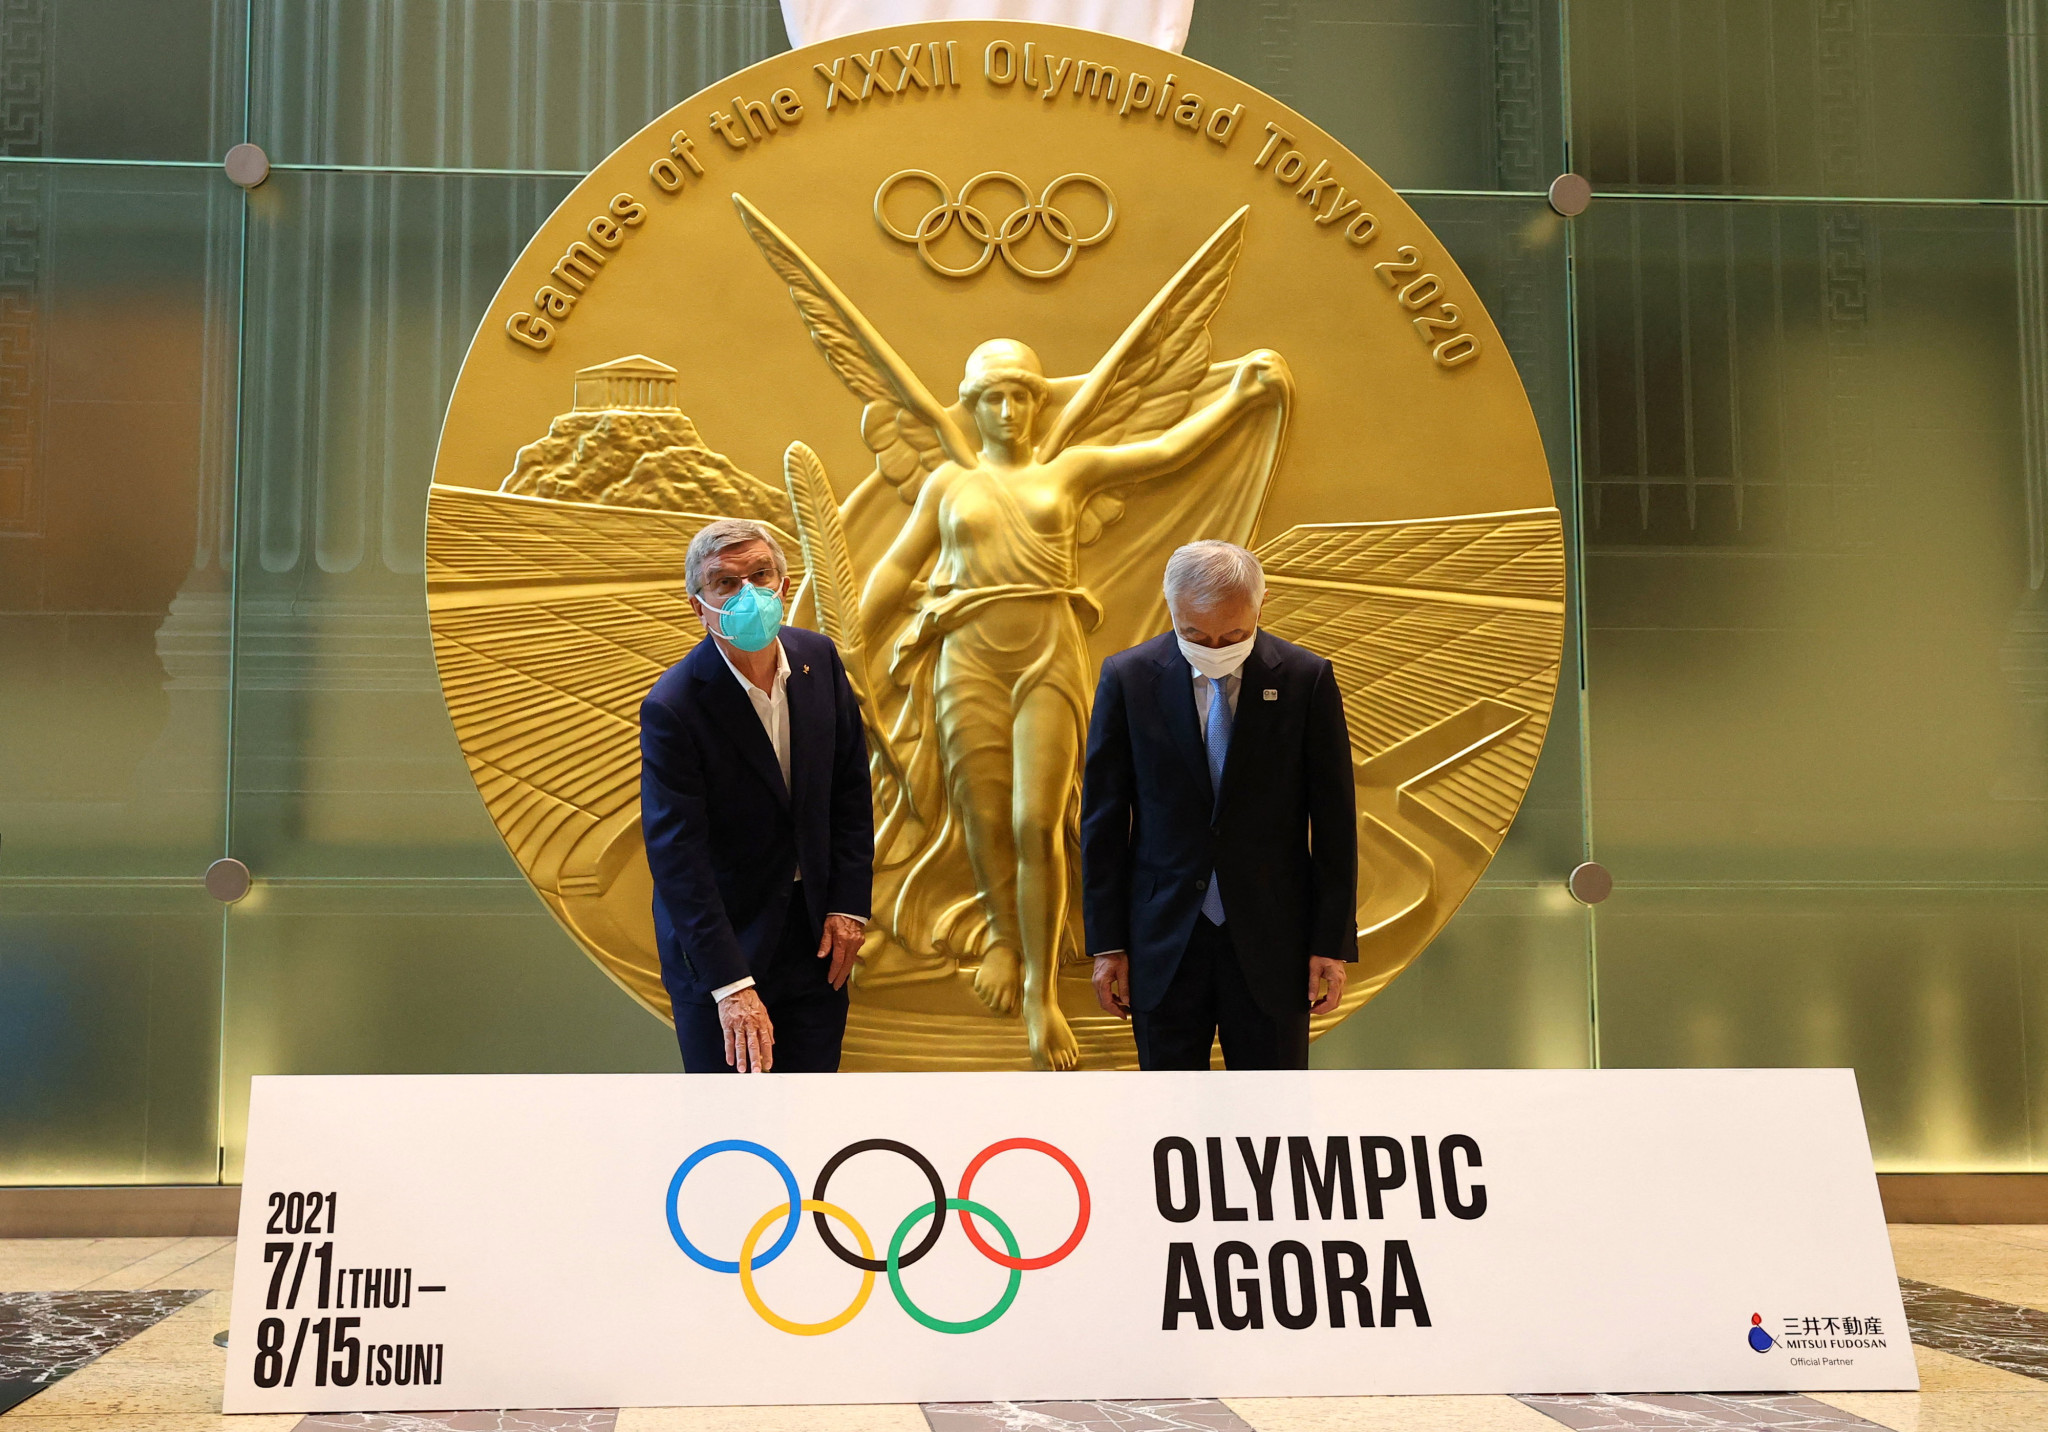 IOC President Thomas Bach visited the Olympic Agora in Tokyo ©Getty Images